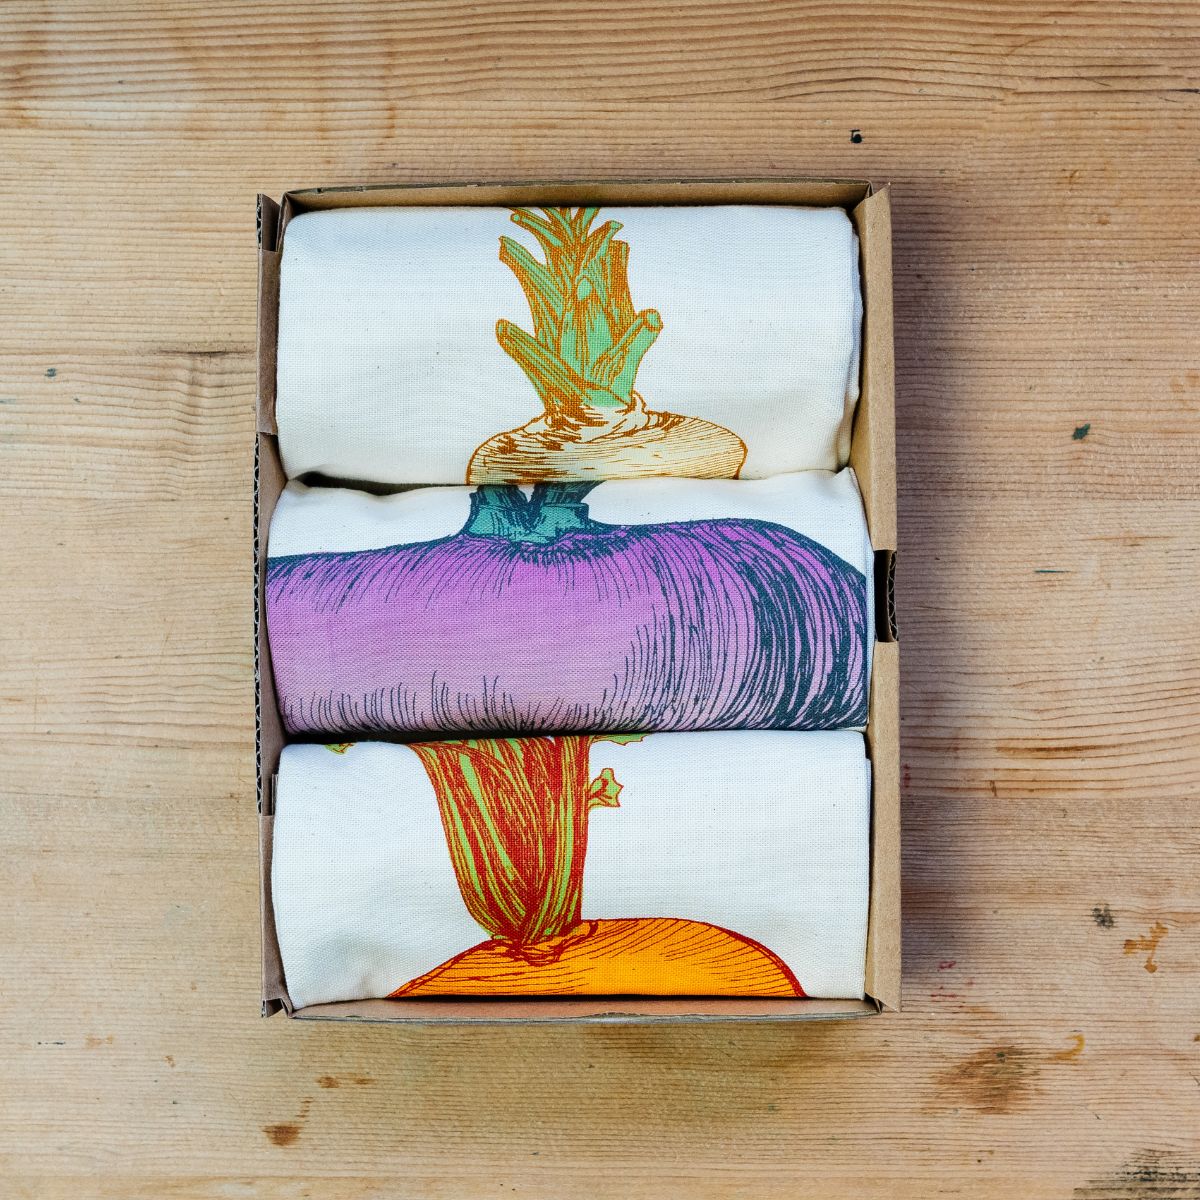 Three mixed vegetable design cotton tea towels in gift box